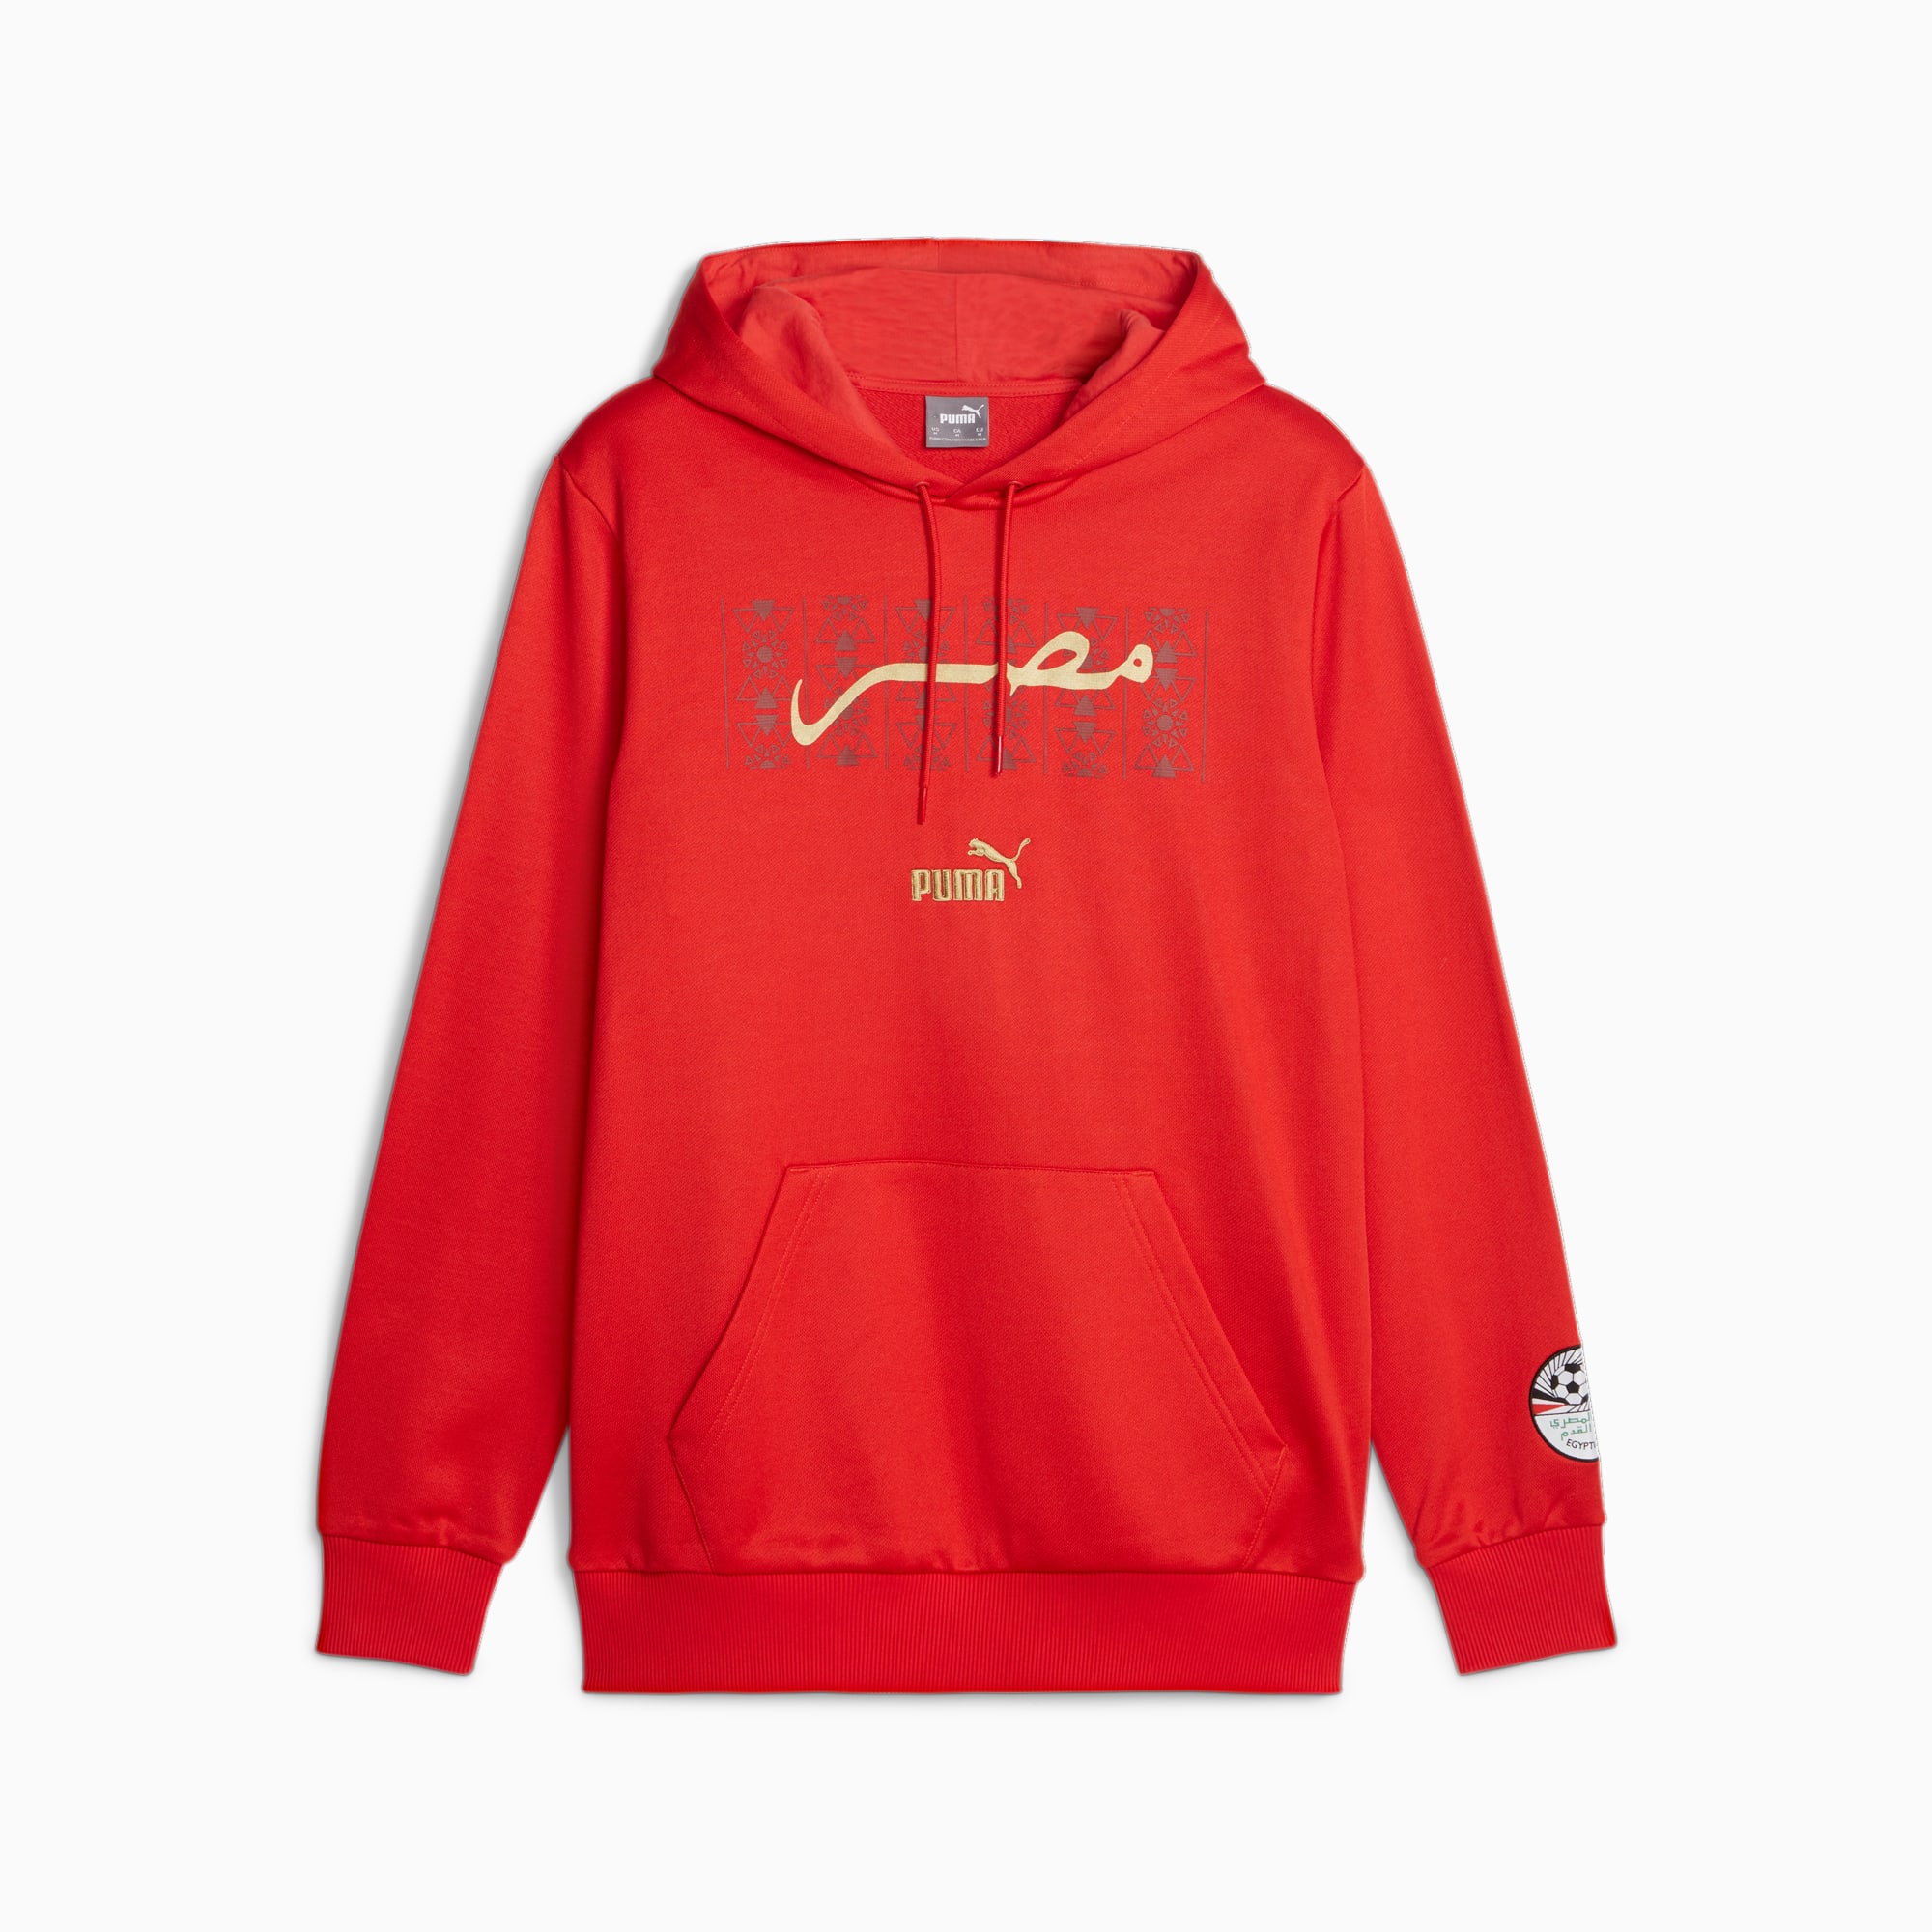 Men's PUMA Egypt Ftblculture Hoodie, Red, Size XS, Clothing